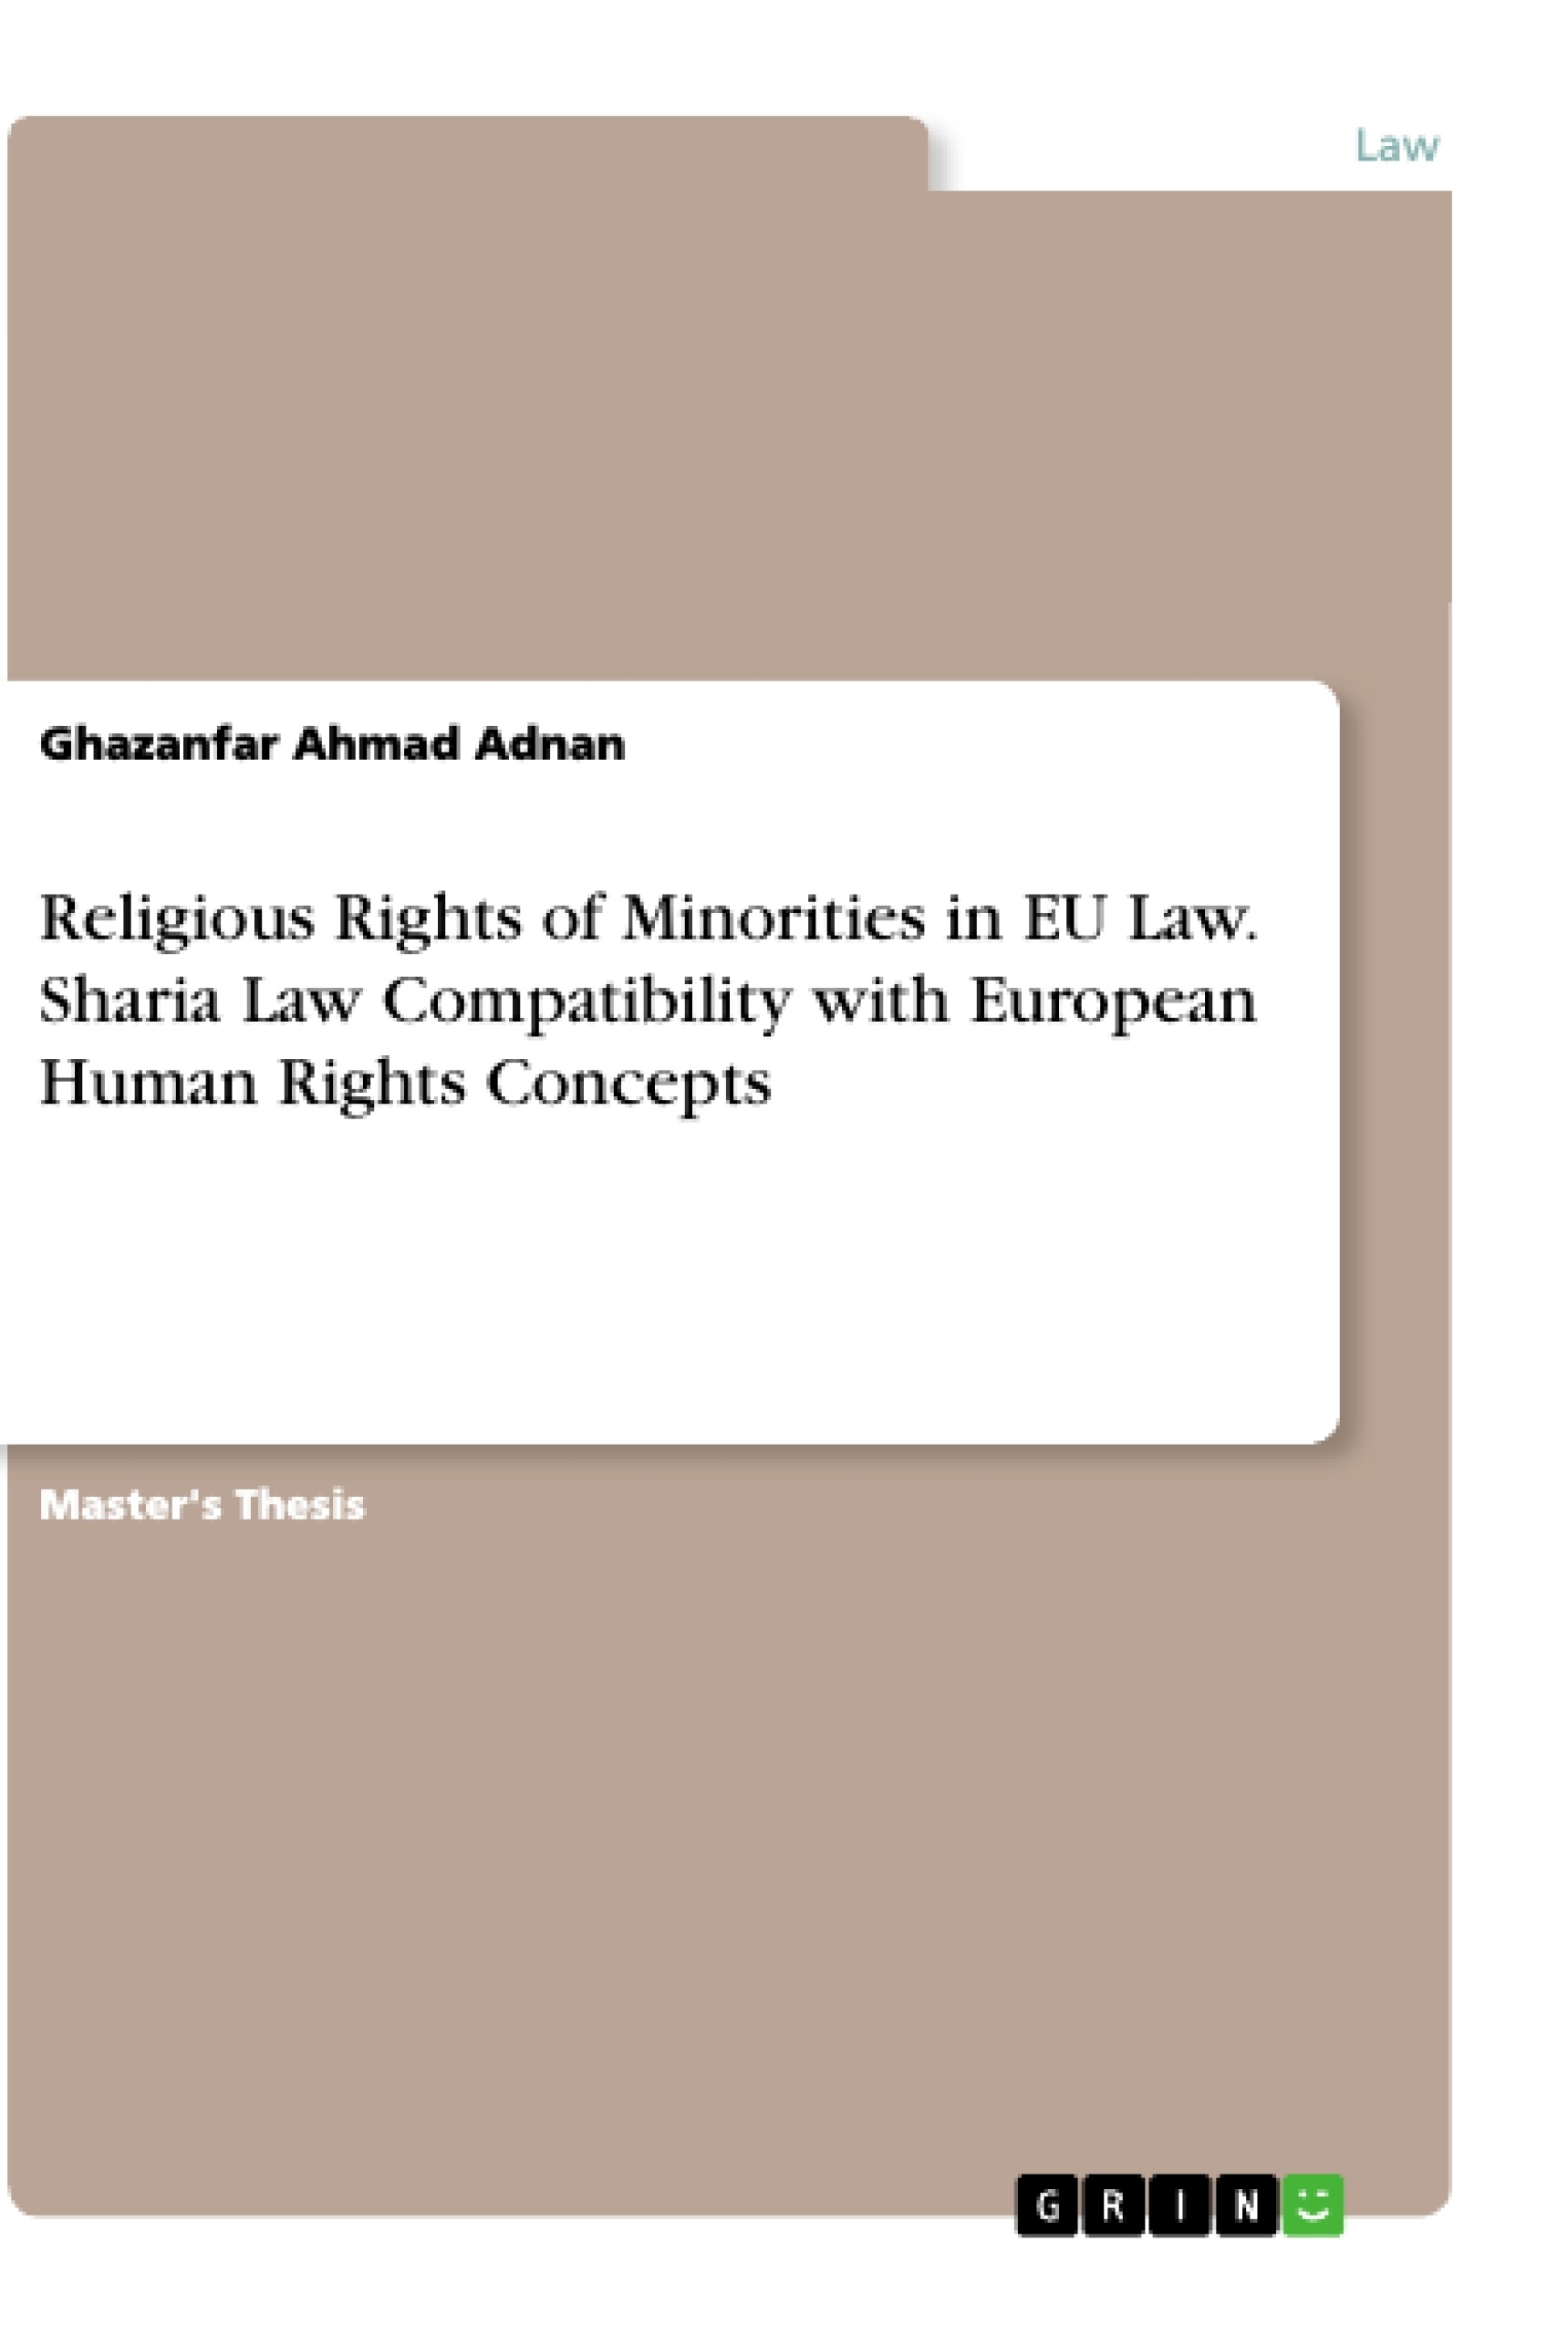 Title: Religious Rights of Minorities in EU Law. Sharia Law Compatibility with European Human Rights Concepts